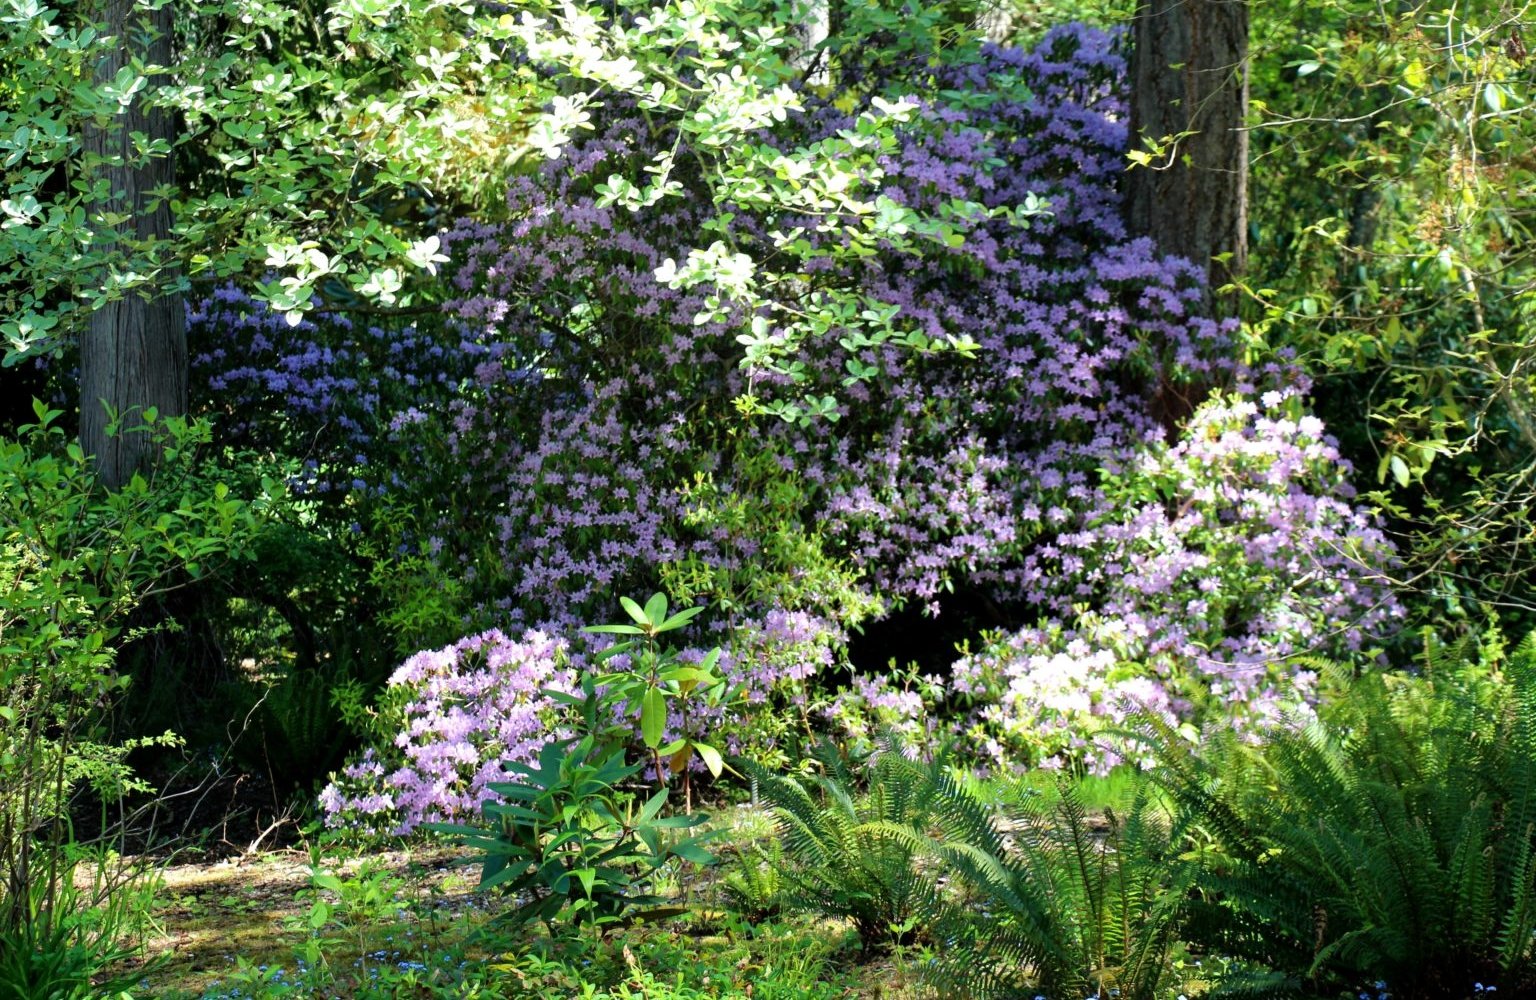 Visiting Milner Gardens and Woodland on Vancouver Island